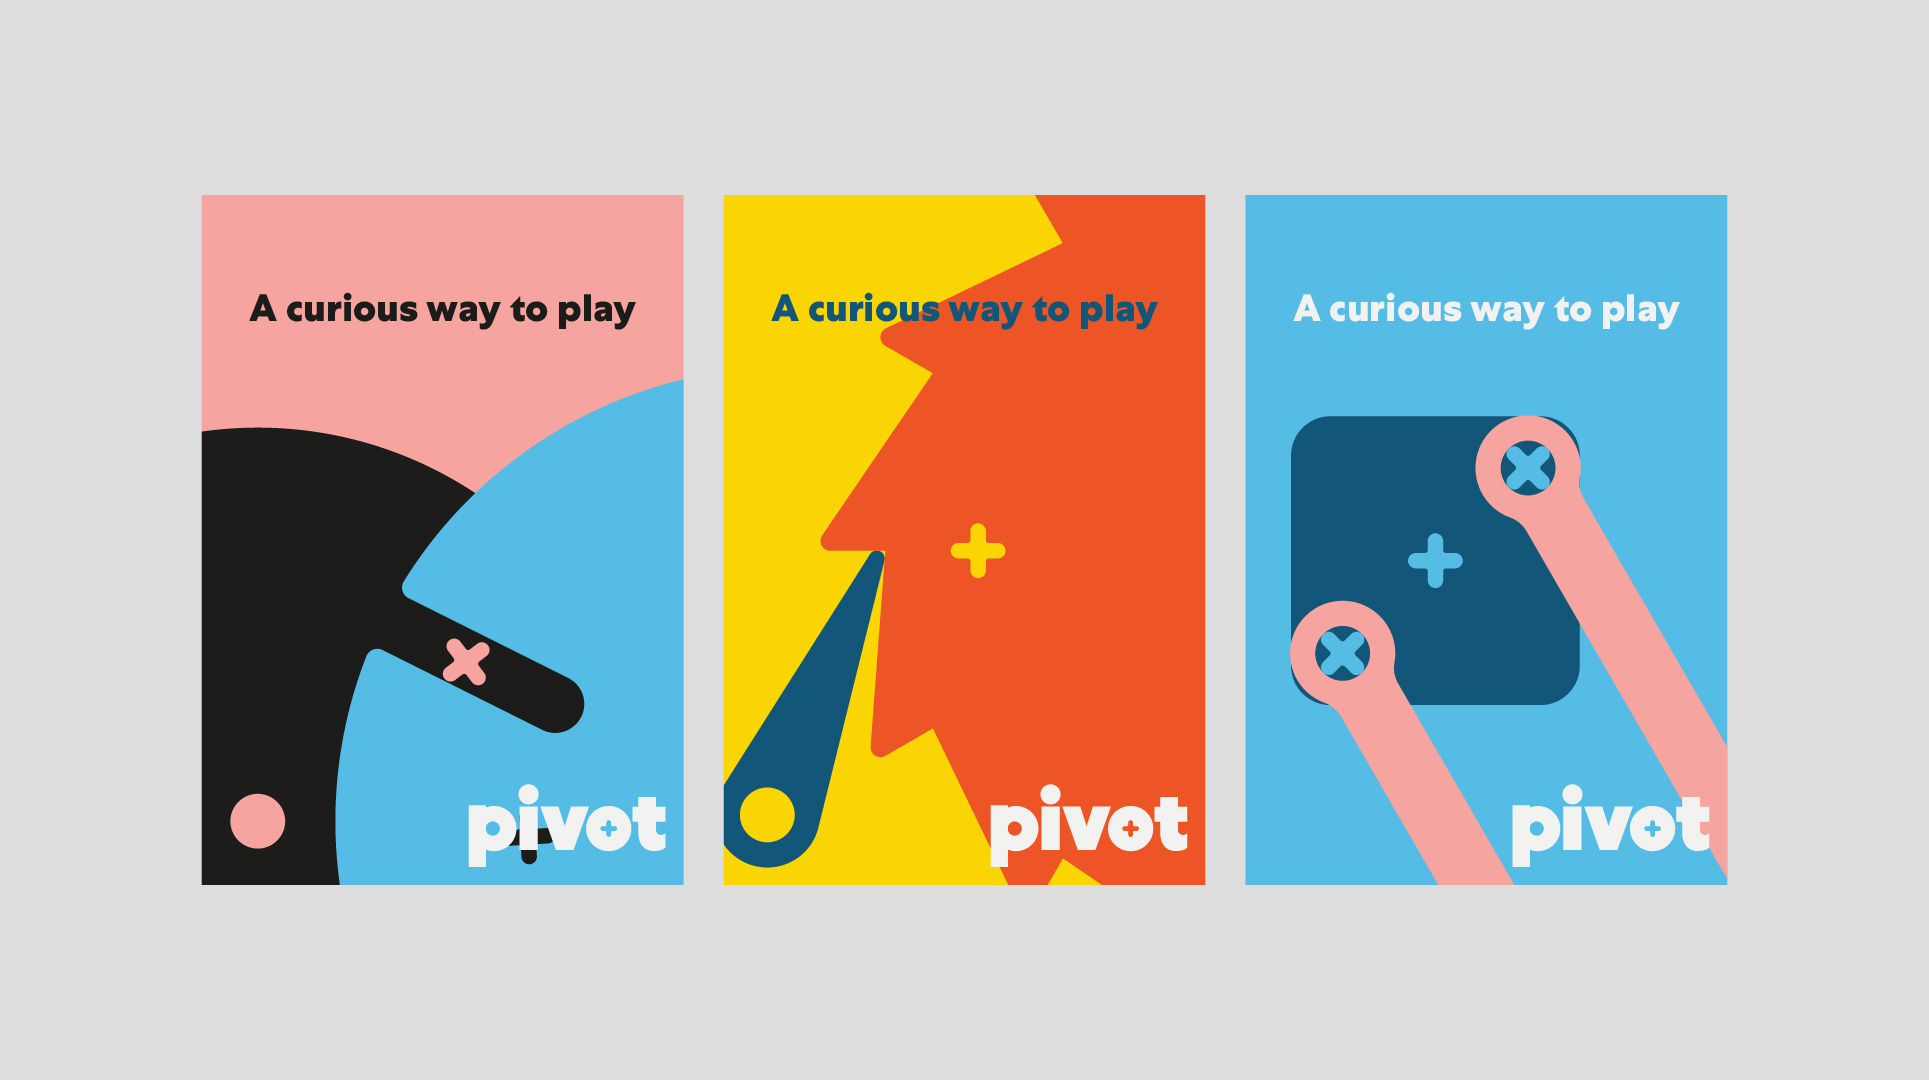 Pivot branding; posters with graphic visuals, logo and headline "a curious way to play"